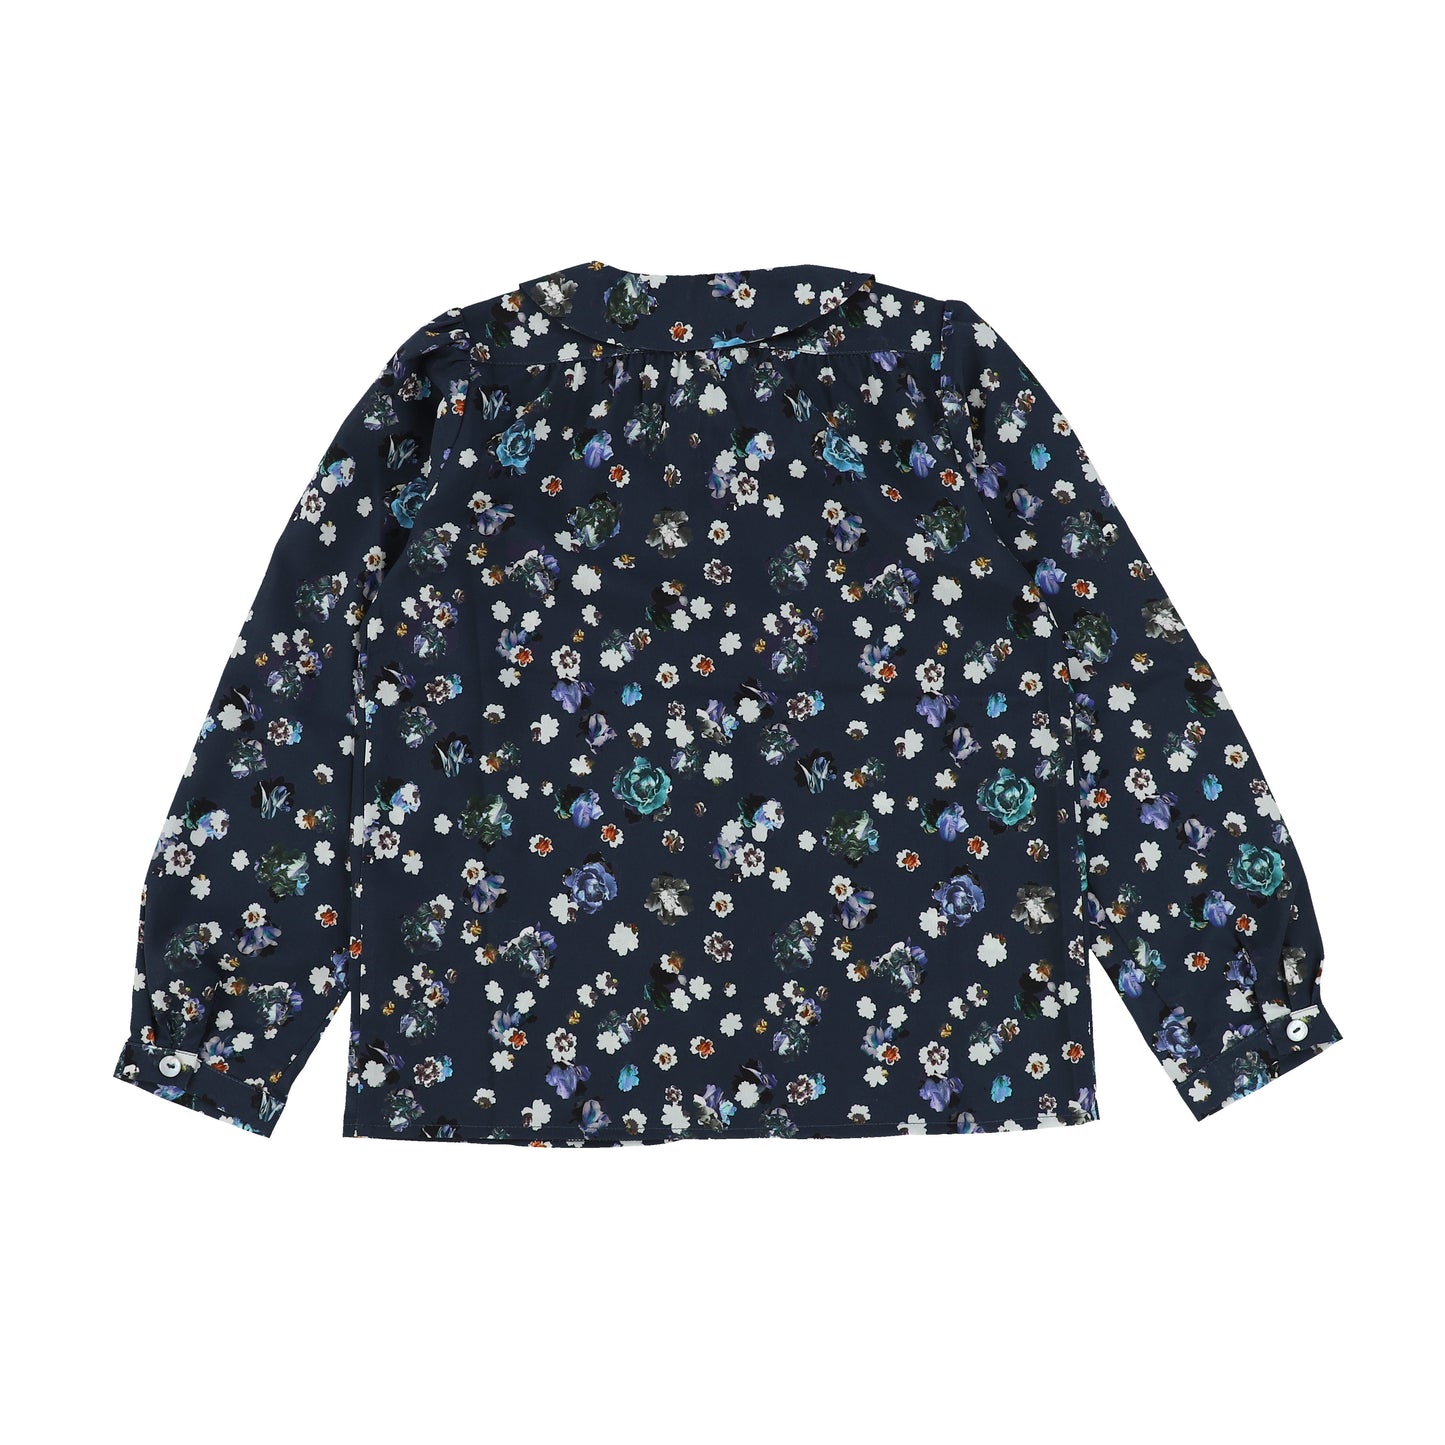 CHRISTINA RHODE MIDNIGHT BLUE FLORAL PETER PAN COLLARED BLOUSE [Final Sale]